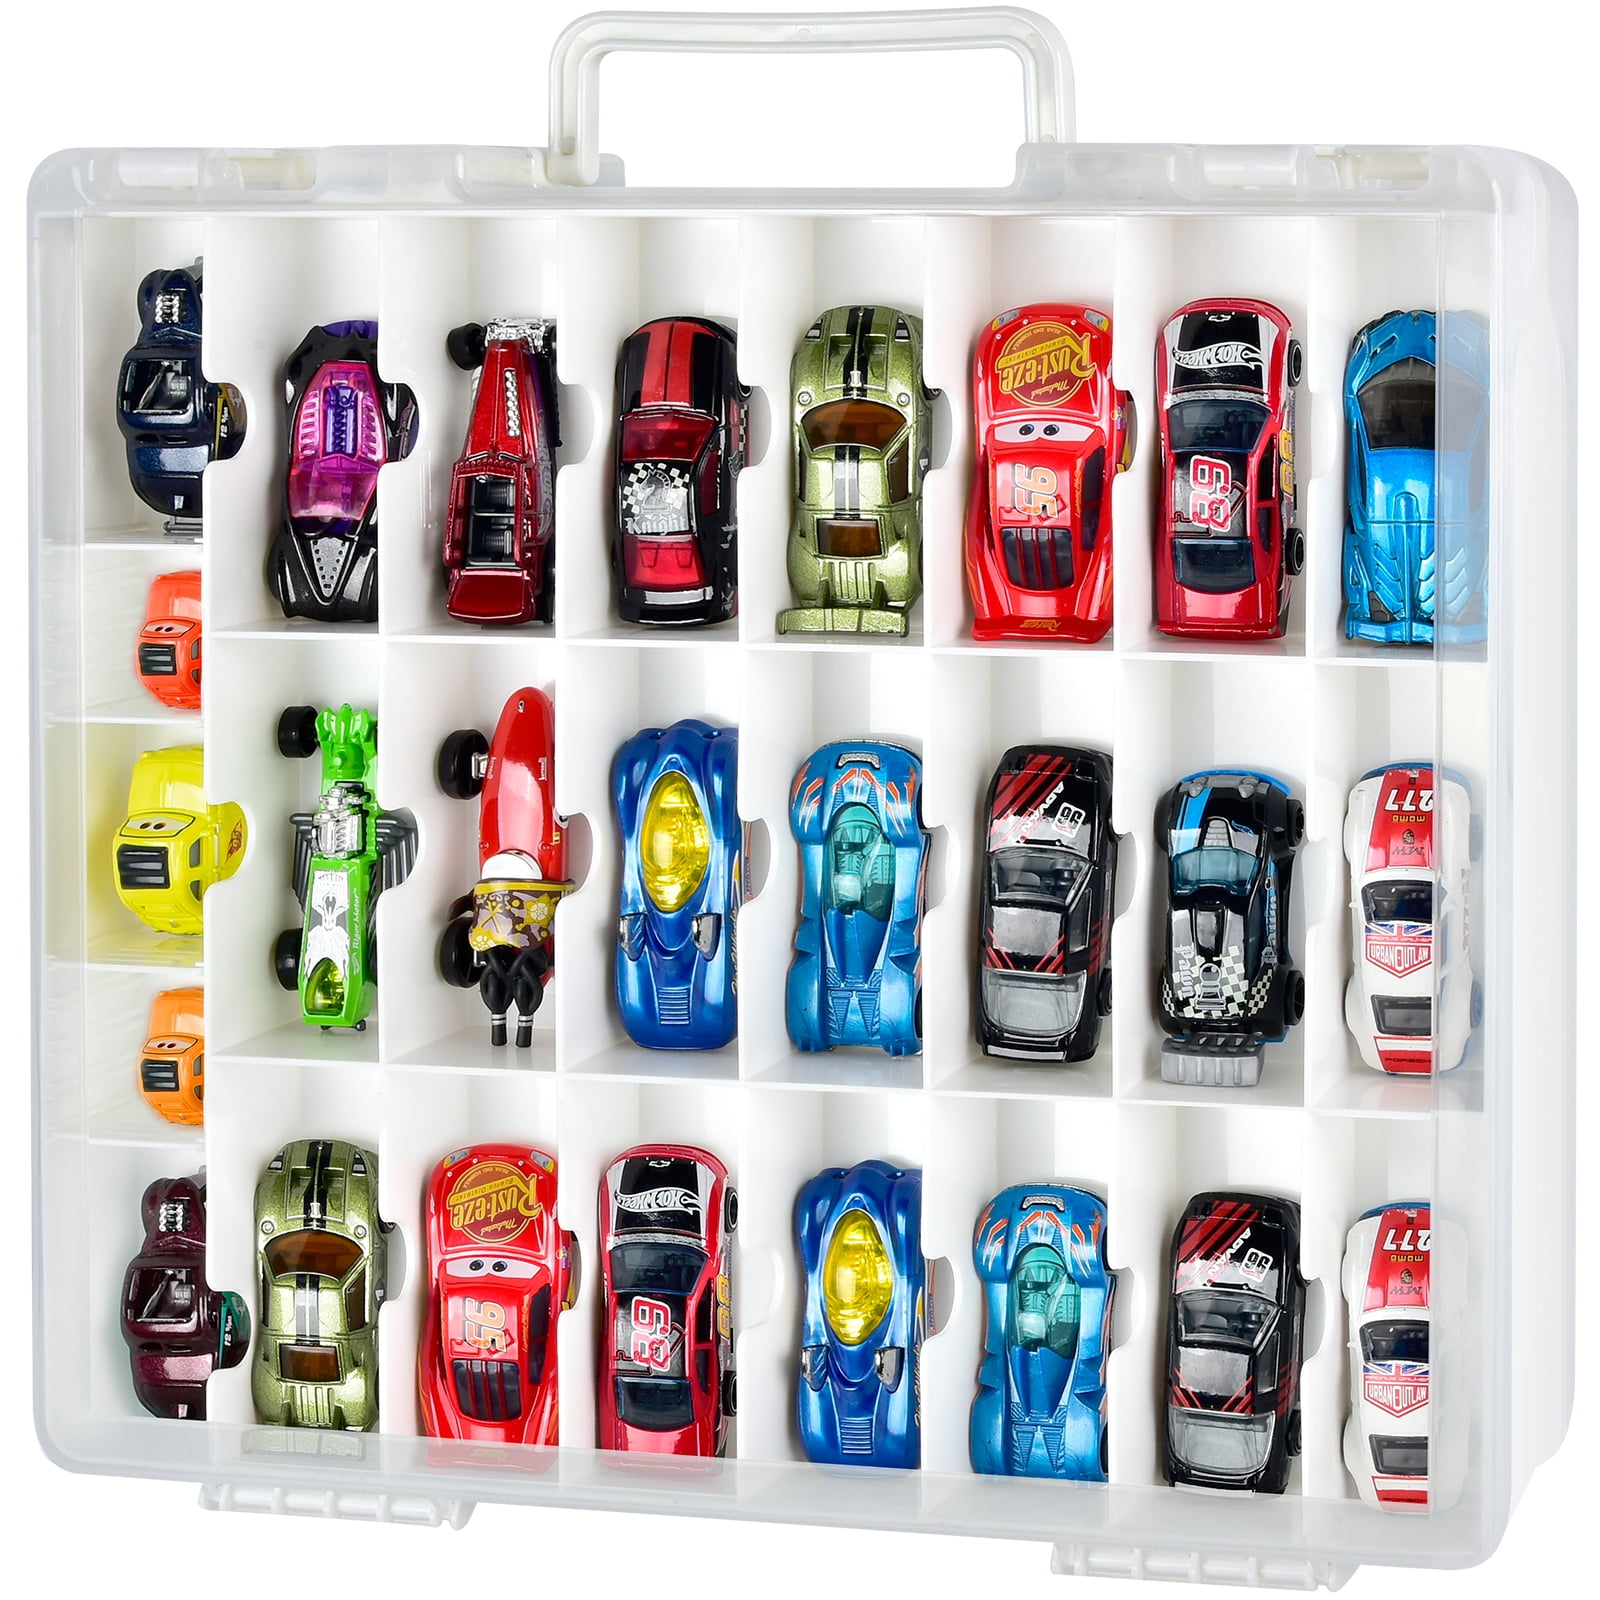 Double Sided Matchbox Car Case, Hand-painted Personalized Toy Car